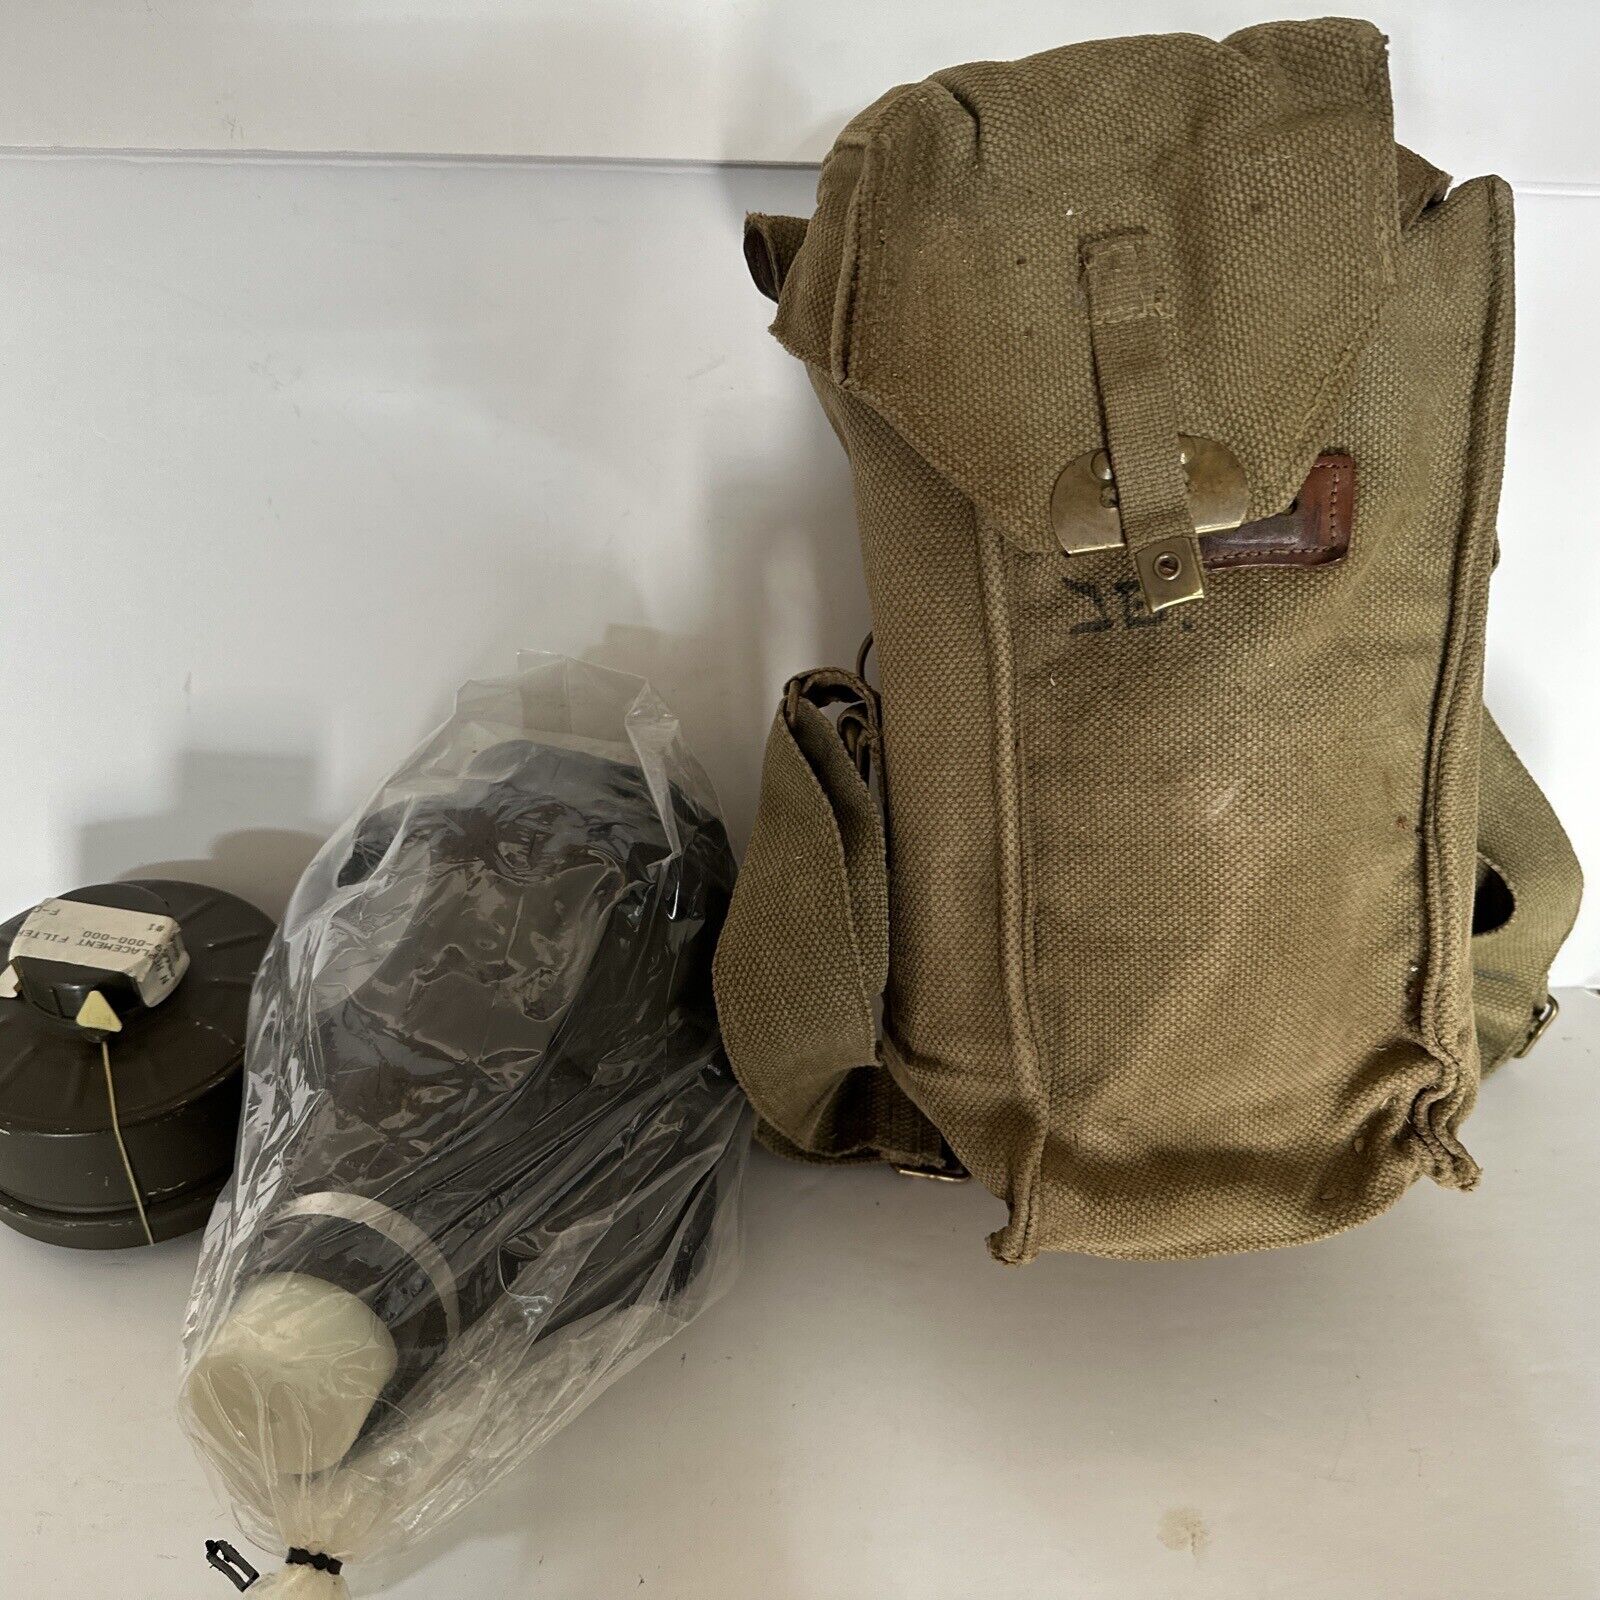 Genuine Israeli rubber gas mask with canister Filter & Extras SEALED